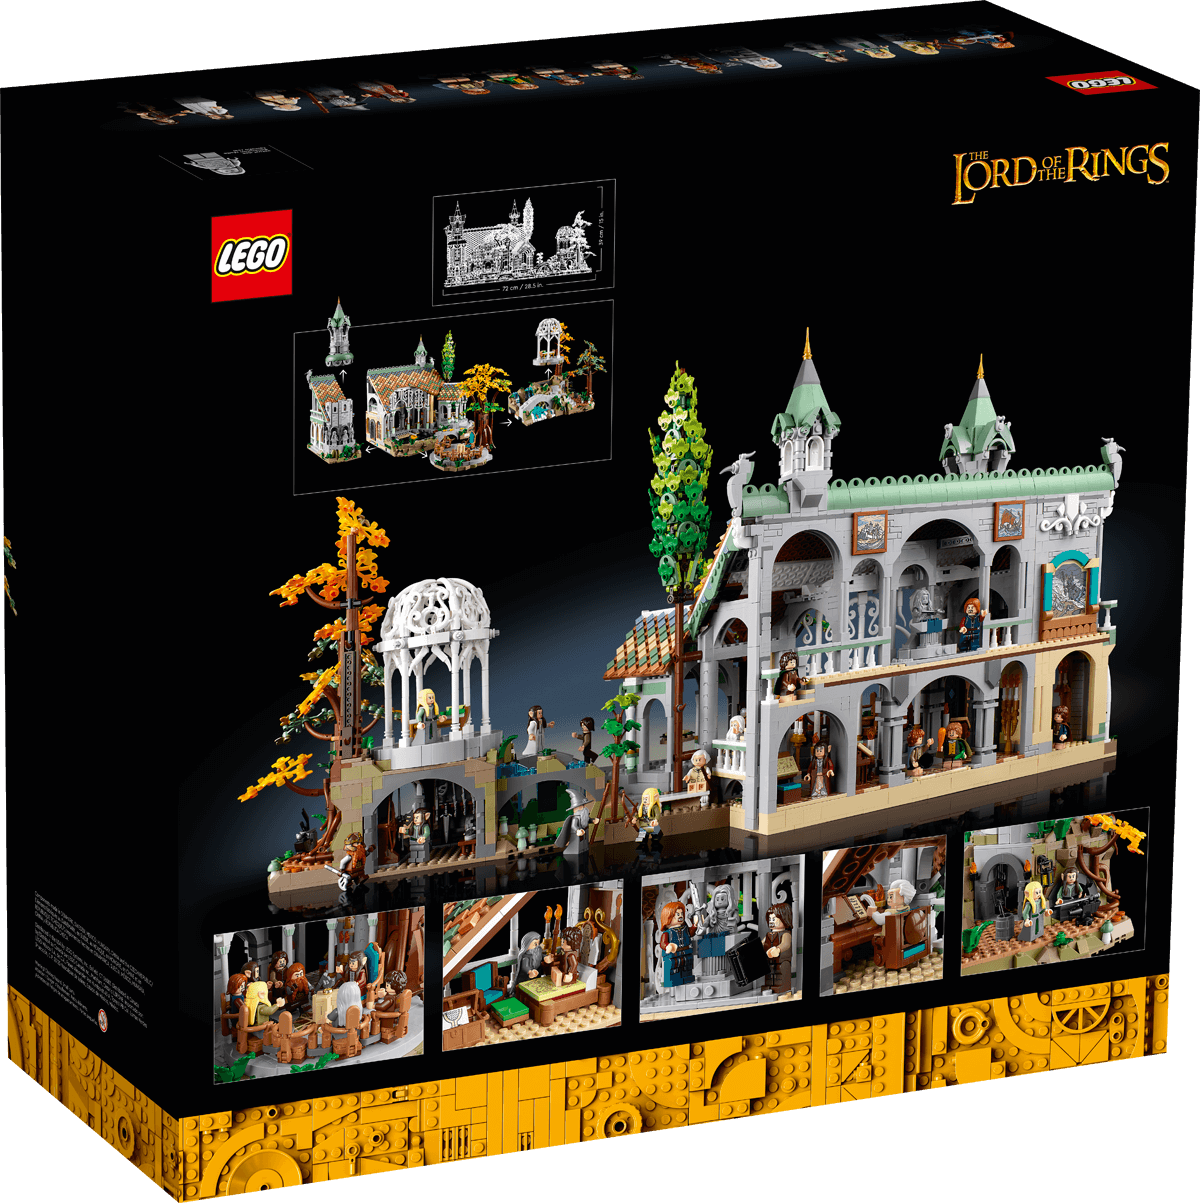 The One LEGO Set to Rule Them All